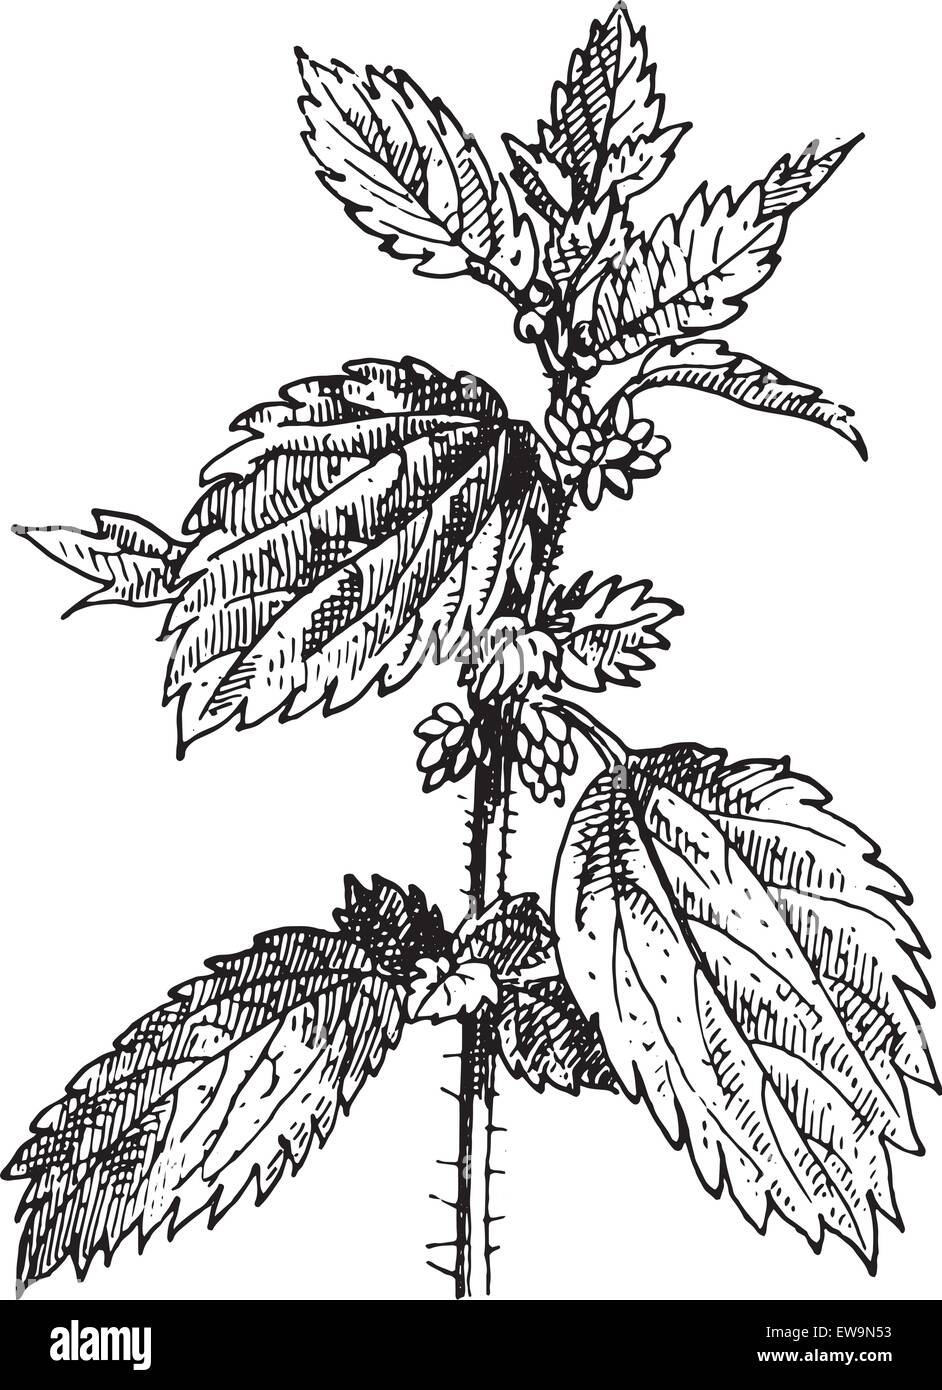 Stinging nettle or Nettle or common nettle or Urtica dioica, vintage engraved illustration. Dictionary of words and things - Larive and Fleury - 1895. Stock Vector